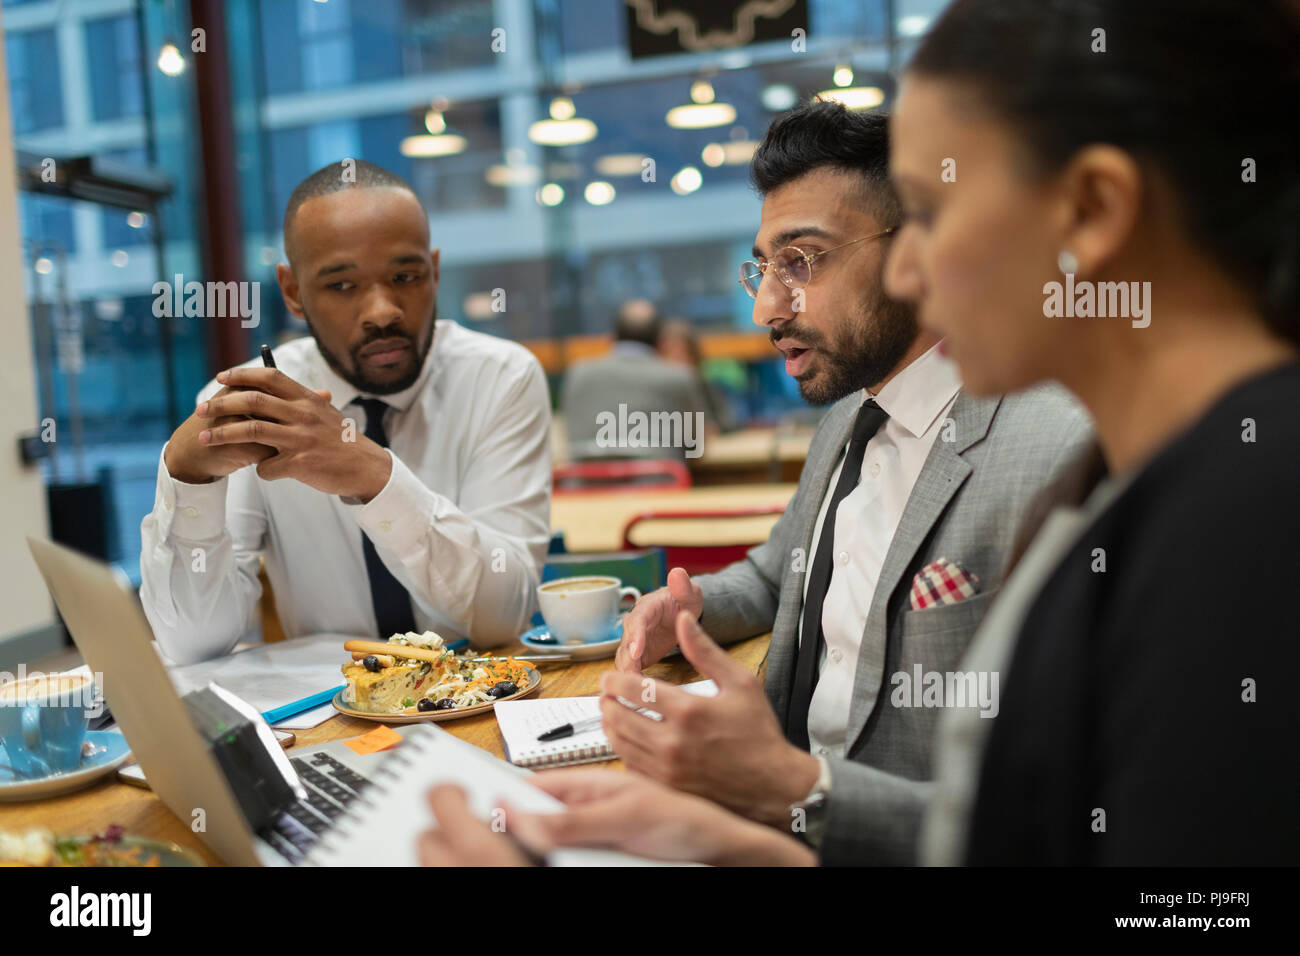 Business people meeting, working in cafe Stock Photo